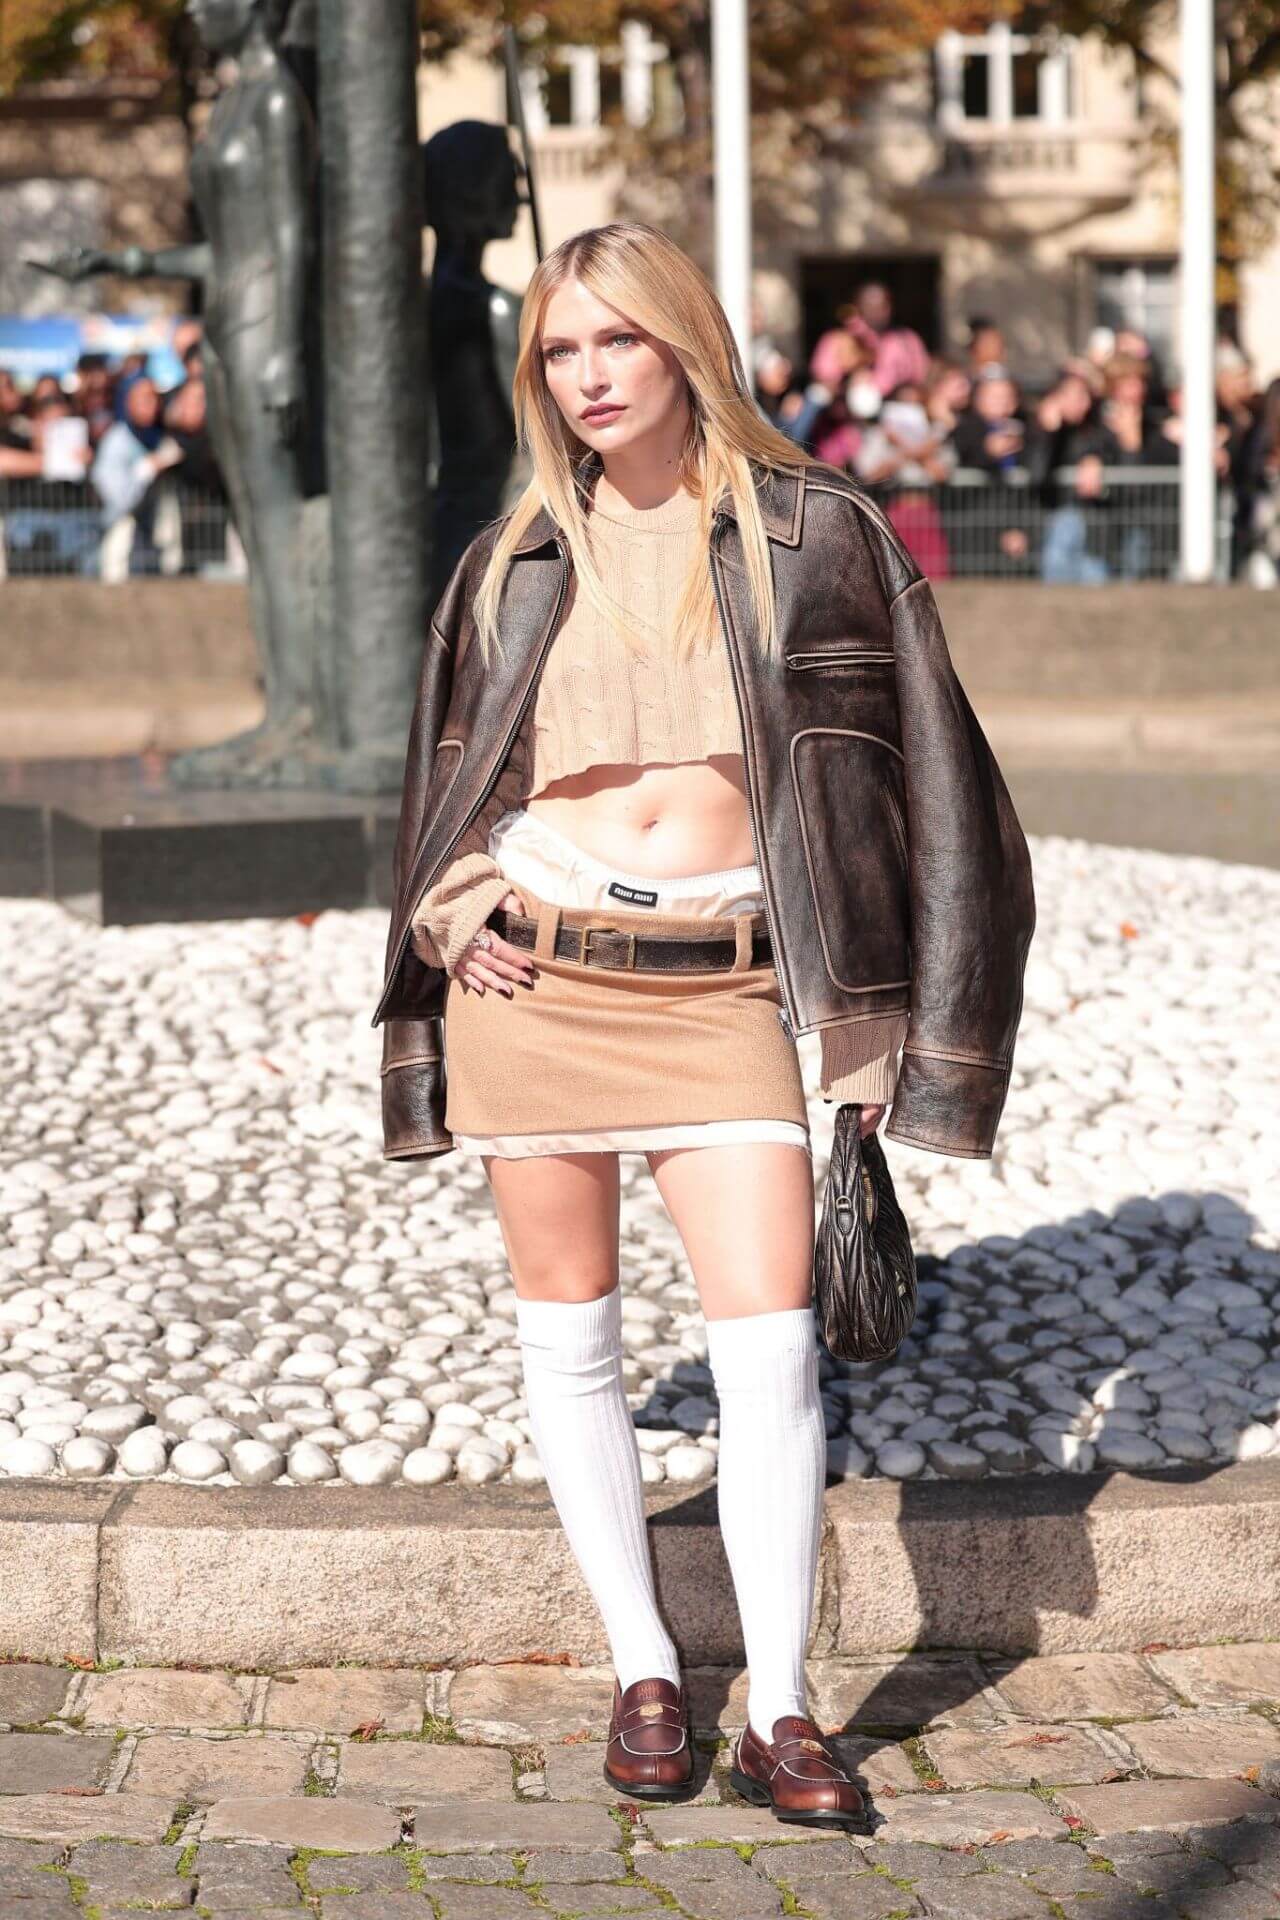 Camille Razat In Off White Crop Top & Mini Skirt With Leather Jacket At Miu Miu Show In Paris Fashion Week